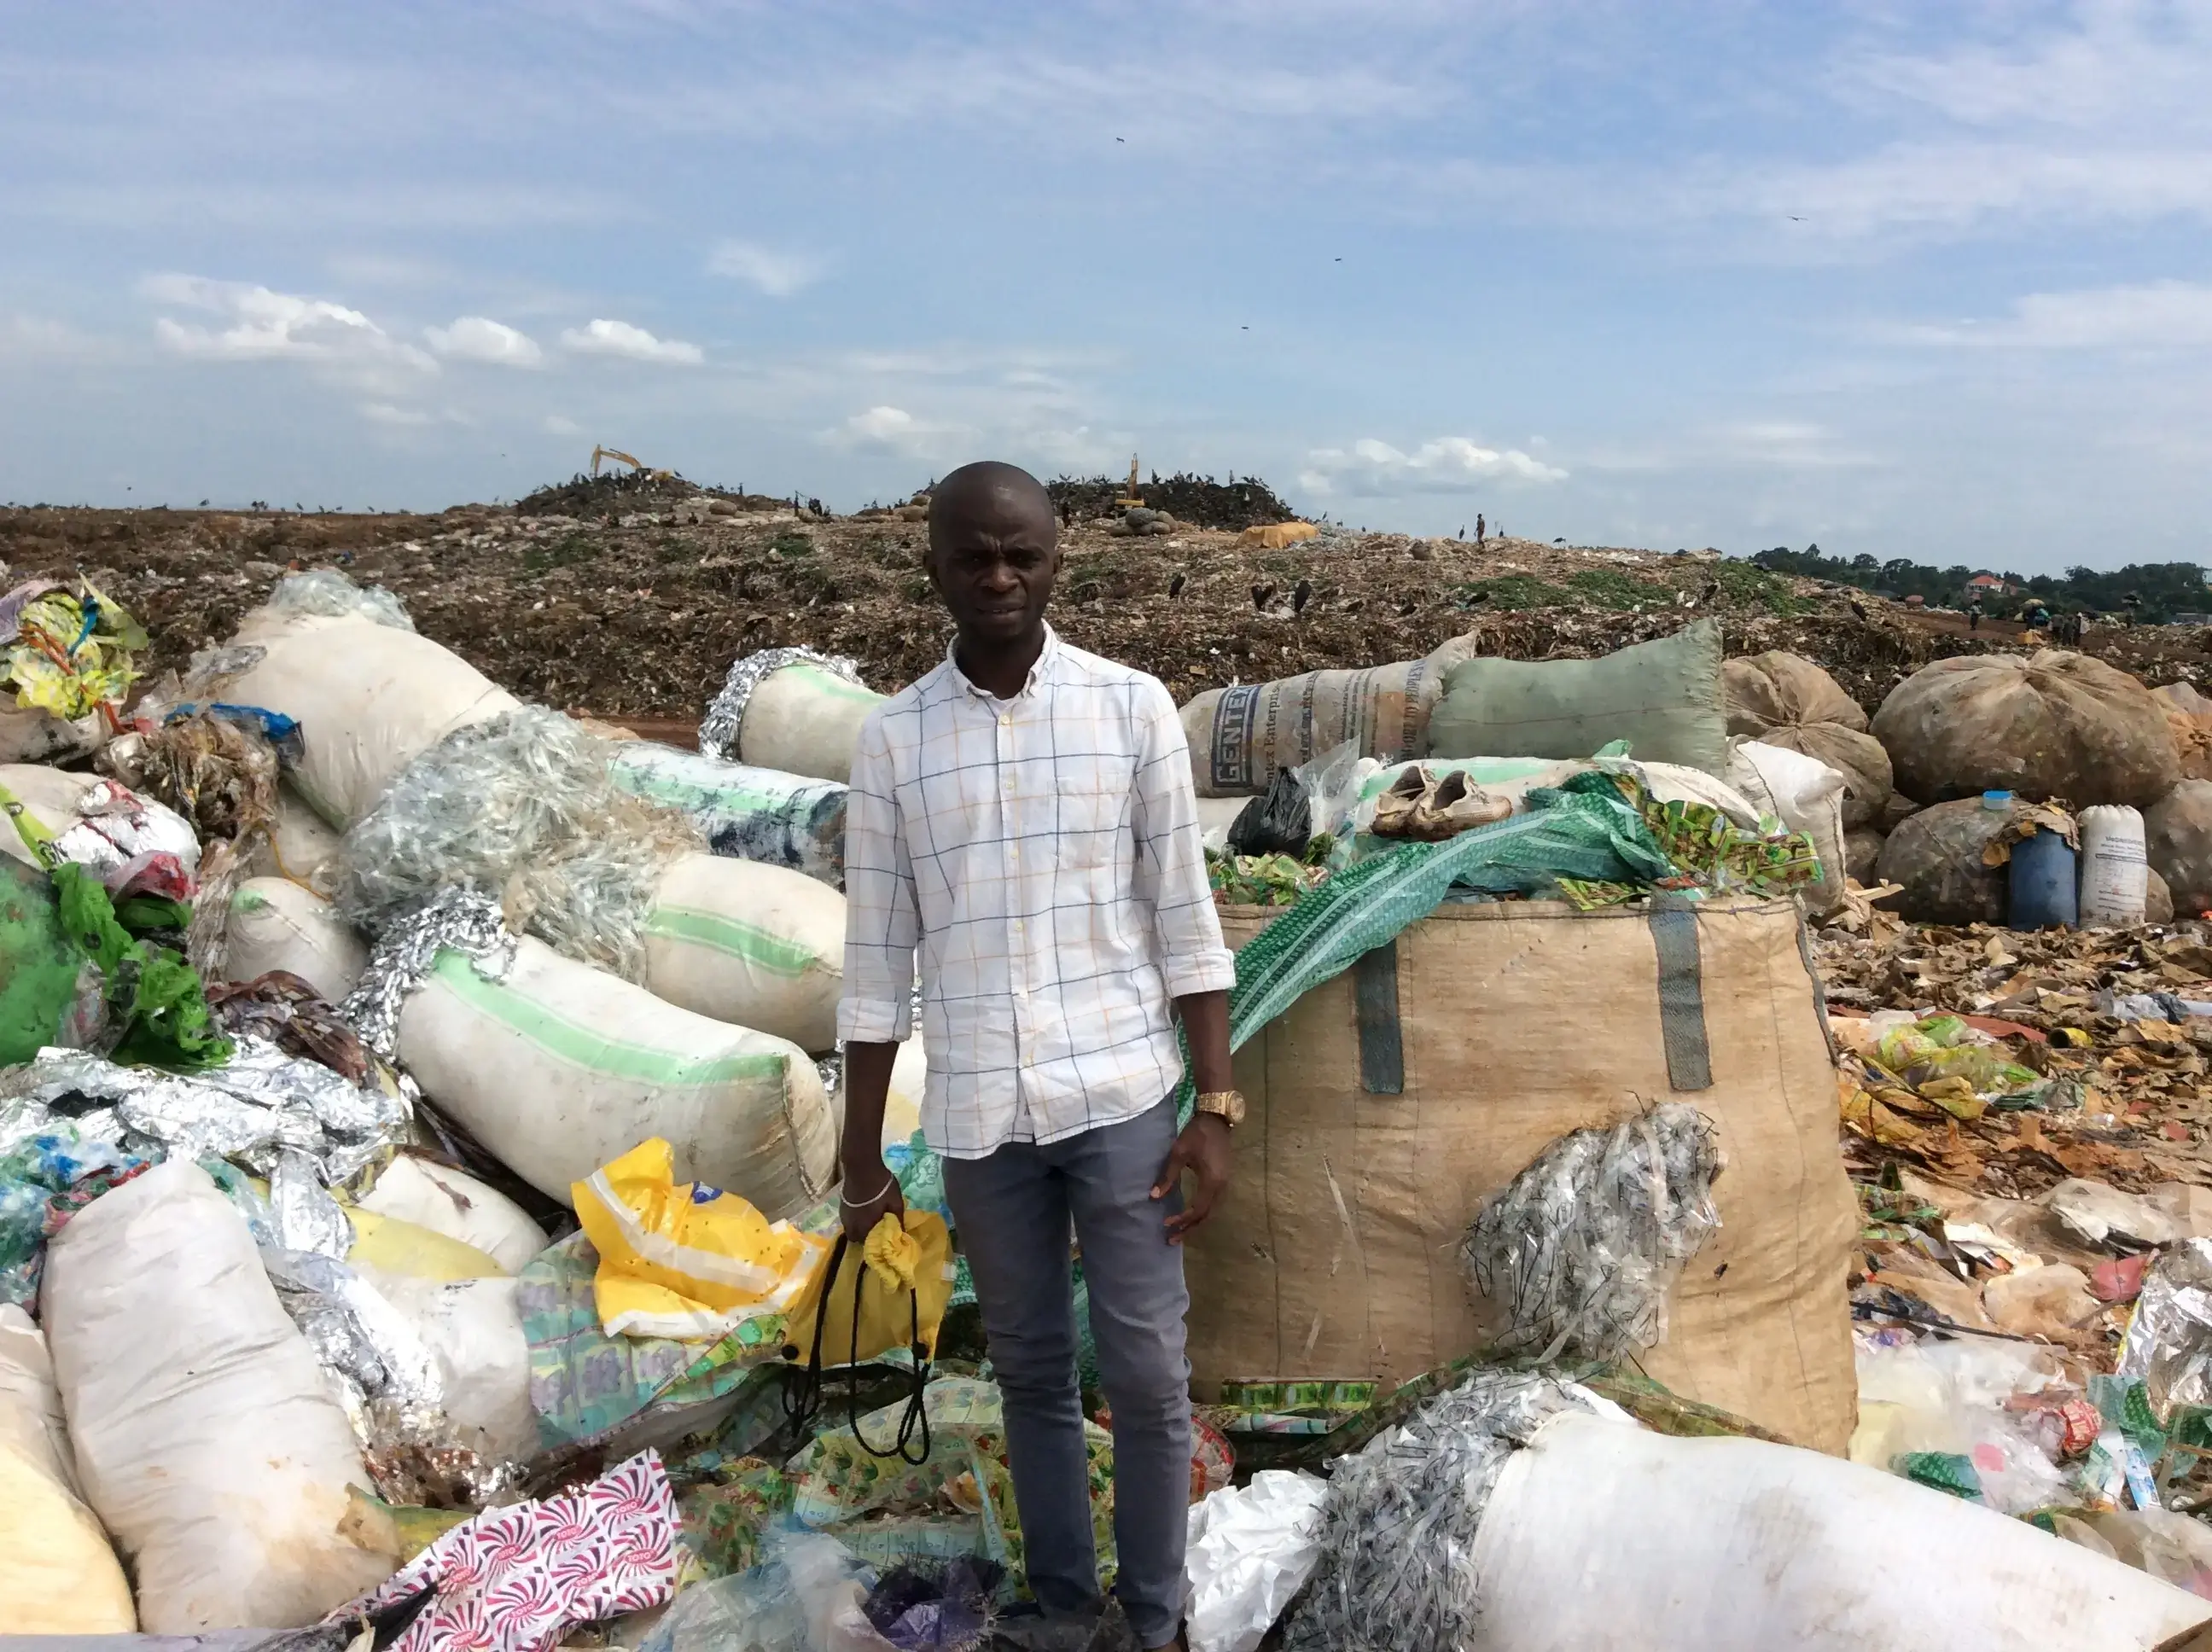 Landfills in Africa filled with used clothes donated to developing nations